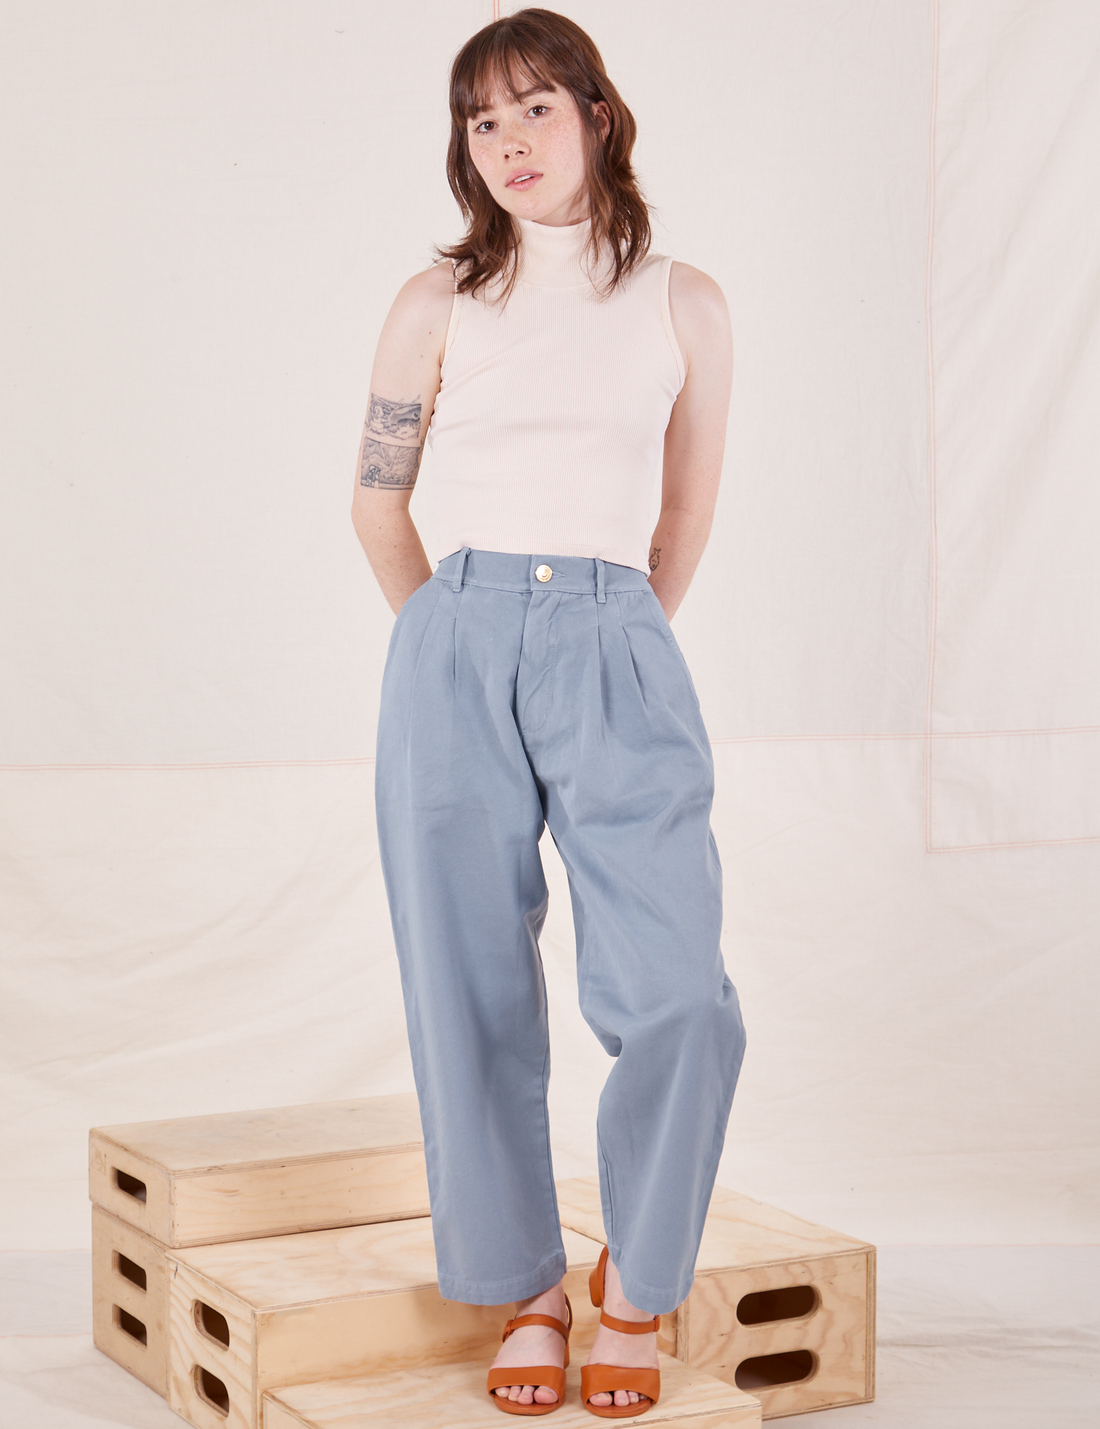 Hana is 5'3" and wearing XXS Petite Organic Trousers in Periwinkle paired with vintage off-white Sleeveless Essential Turtleneck